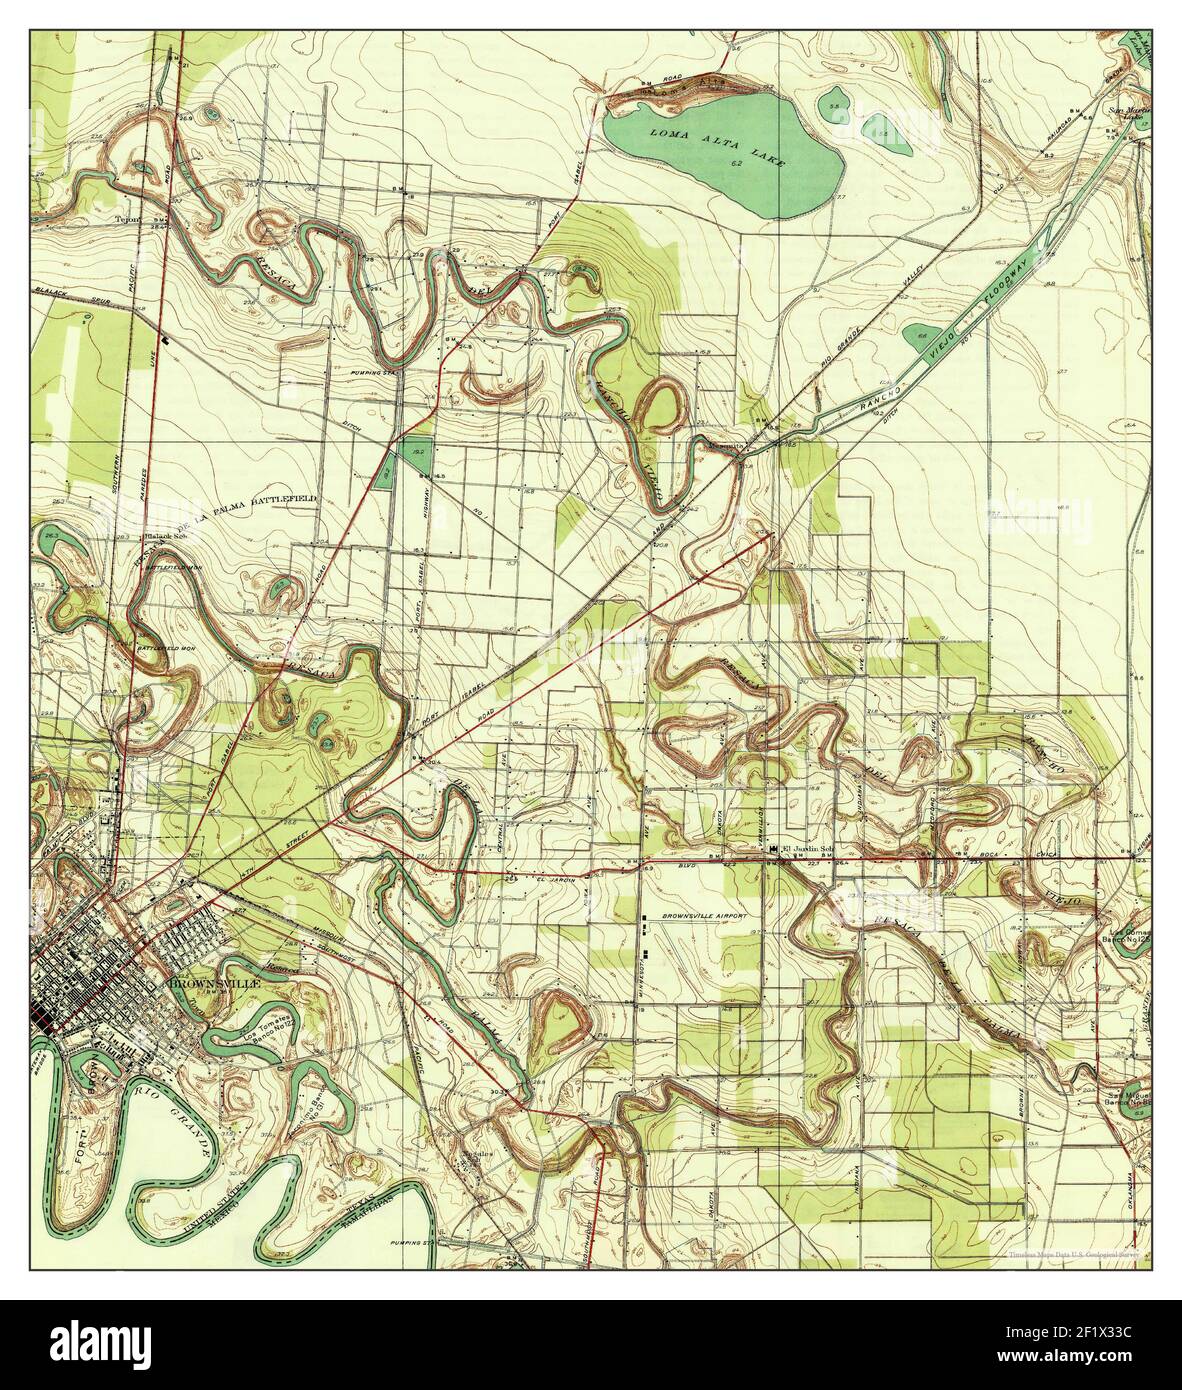 East Brownsville, Texas, map 1936, 1:31680, United States of America by Timeless Maps, data U.S. Geological Survey Stock Photo